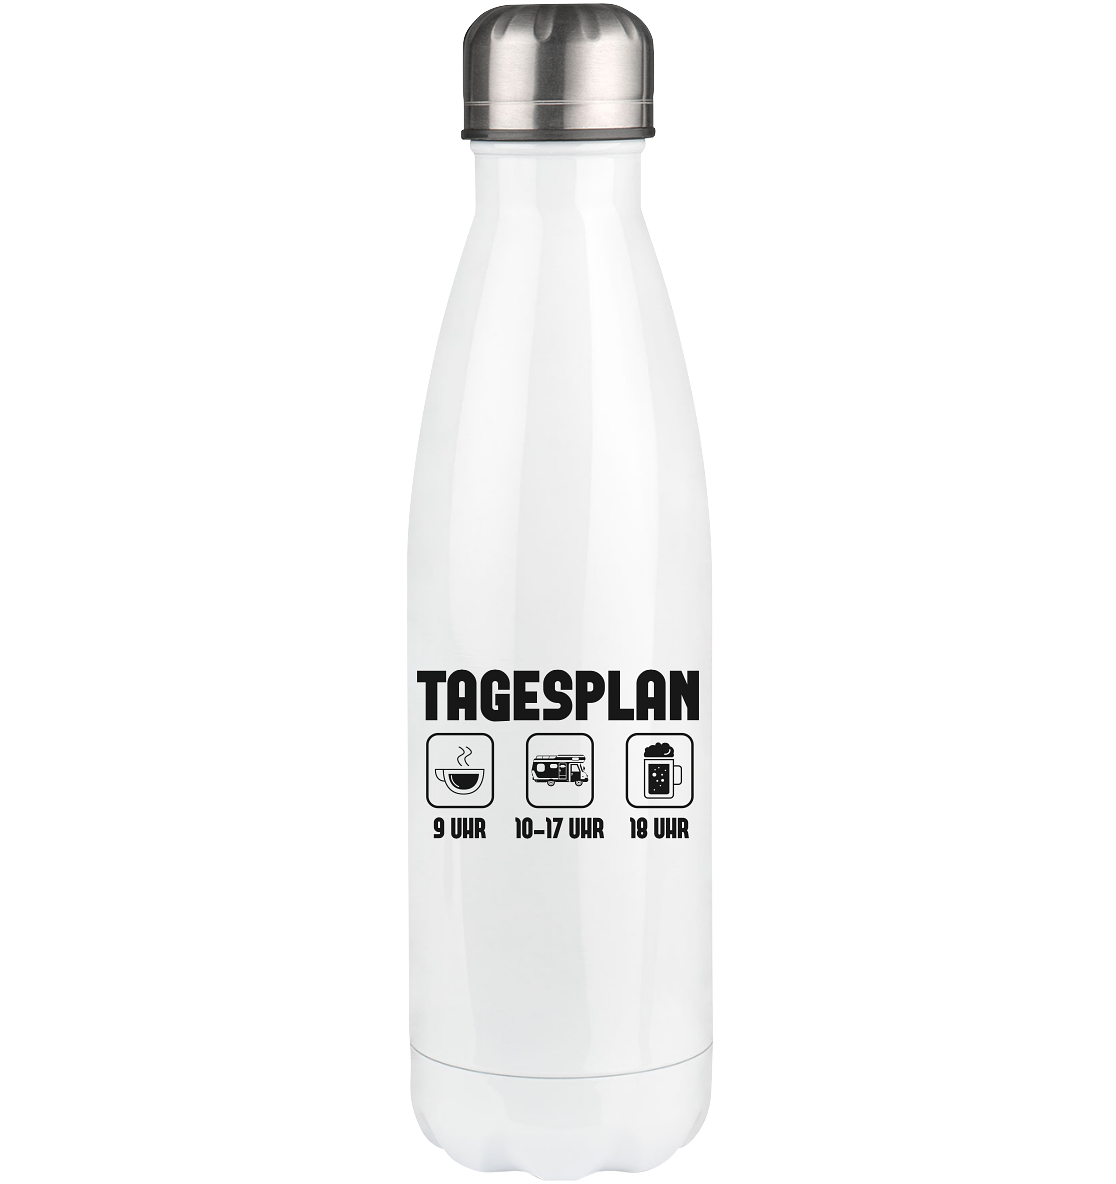 Tagesplan - Edelstahl Thermosflasche camping UONP 500ml